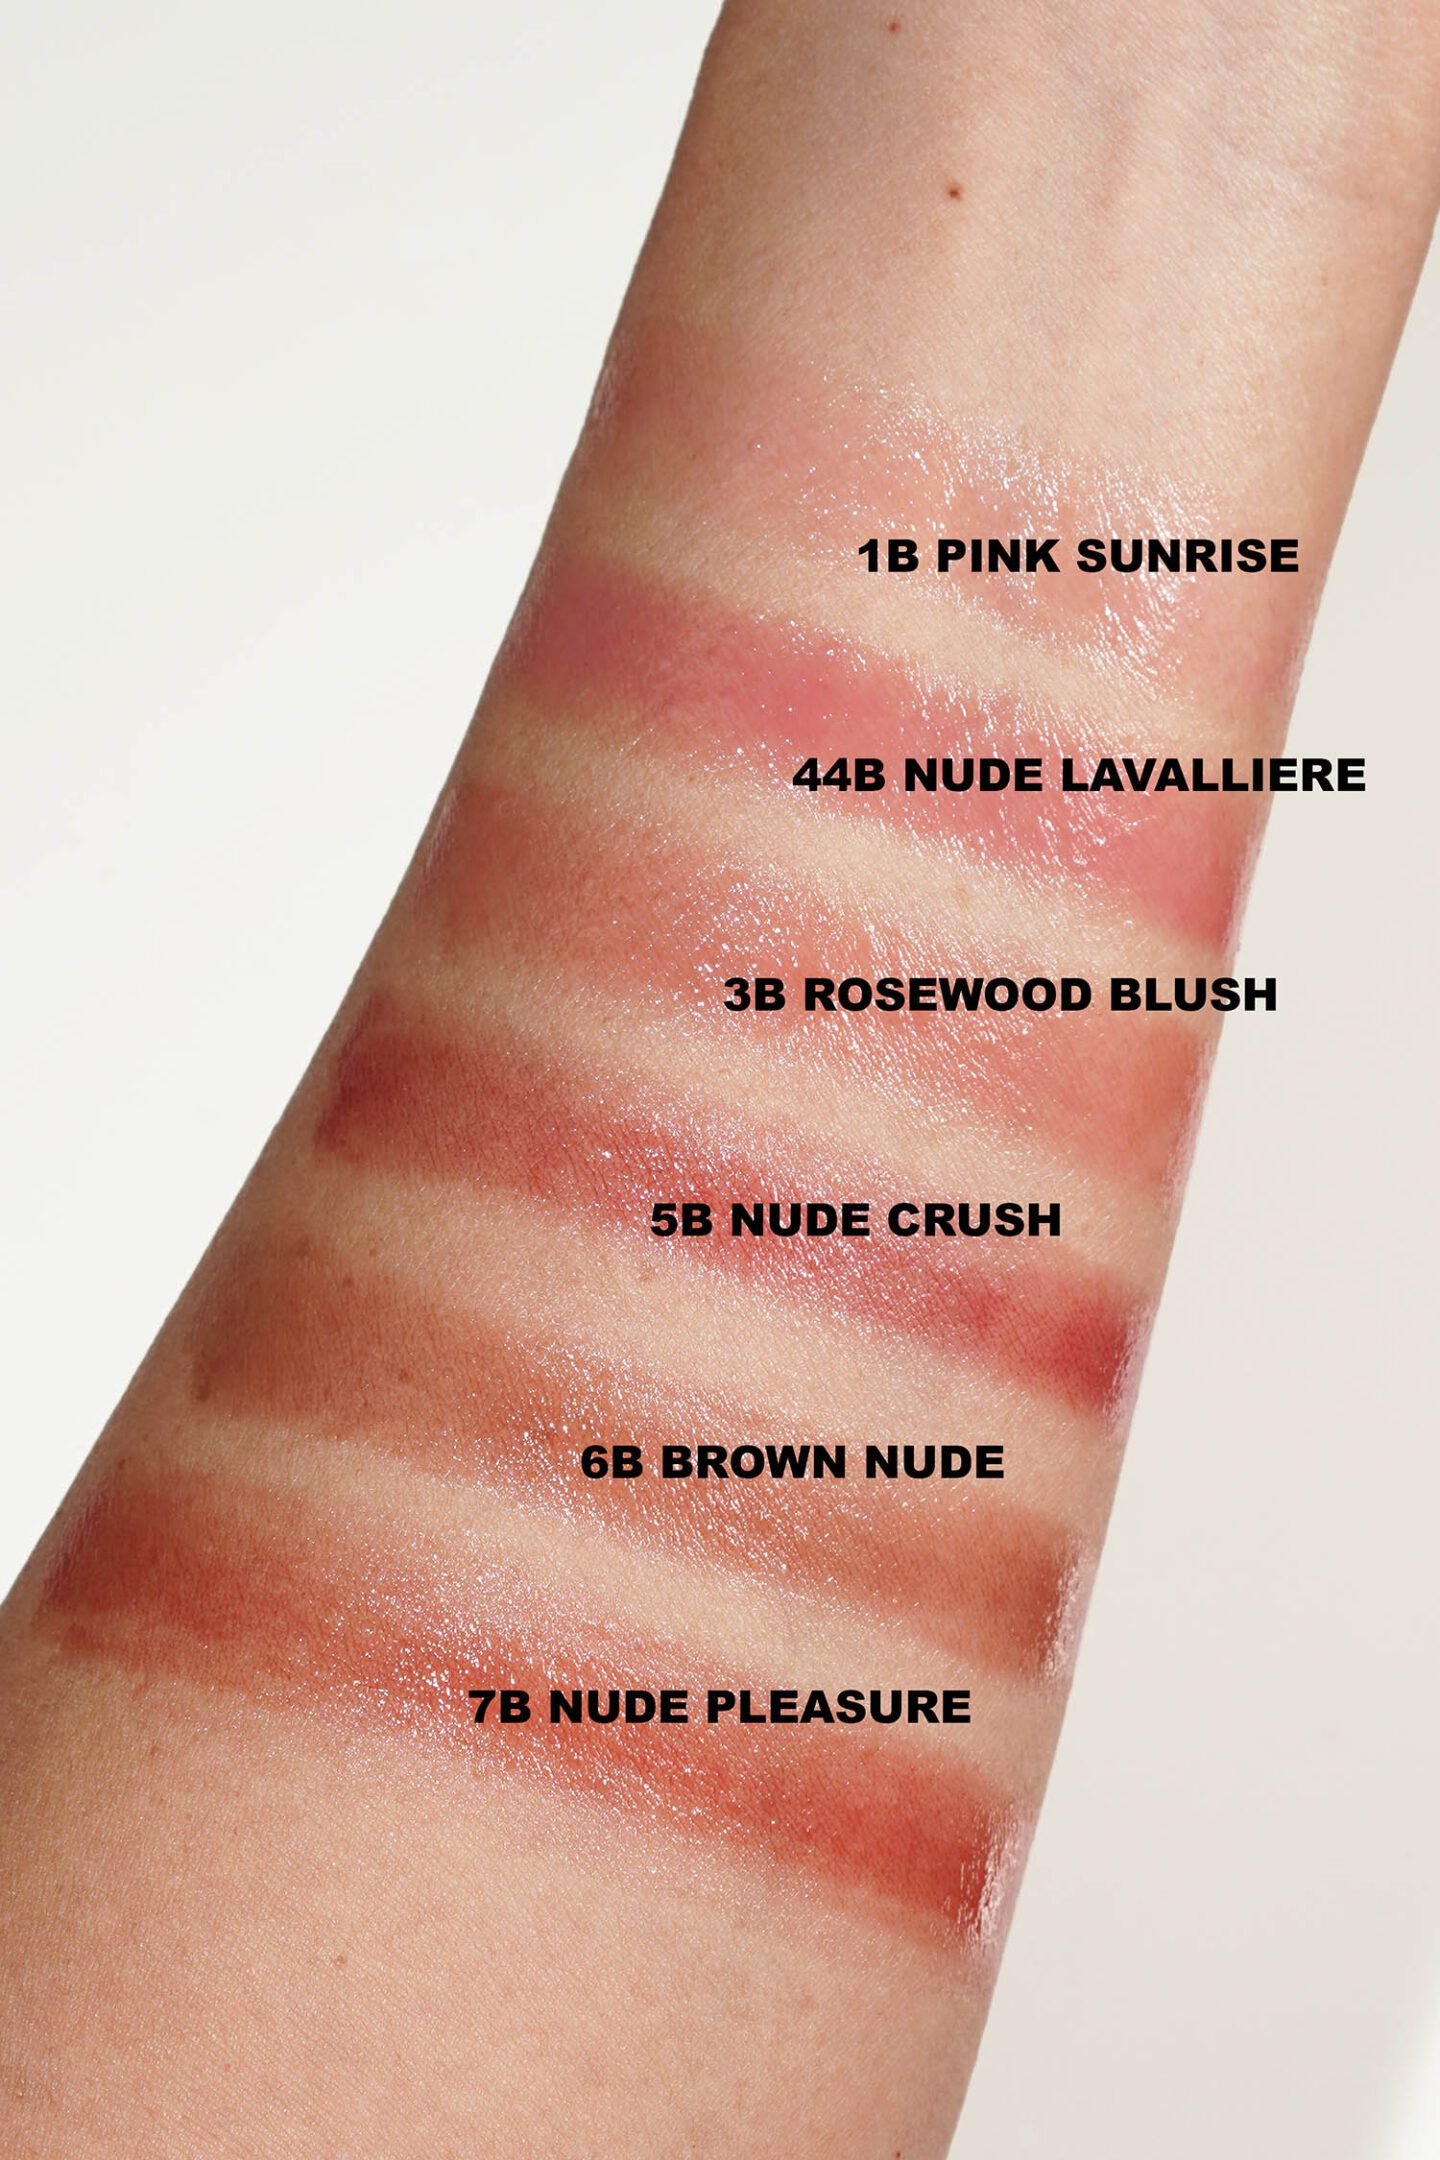 YSL Candy Glow Tinted Butter Balm swatches via The Beauty Lookbook Blog